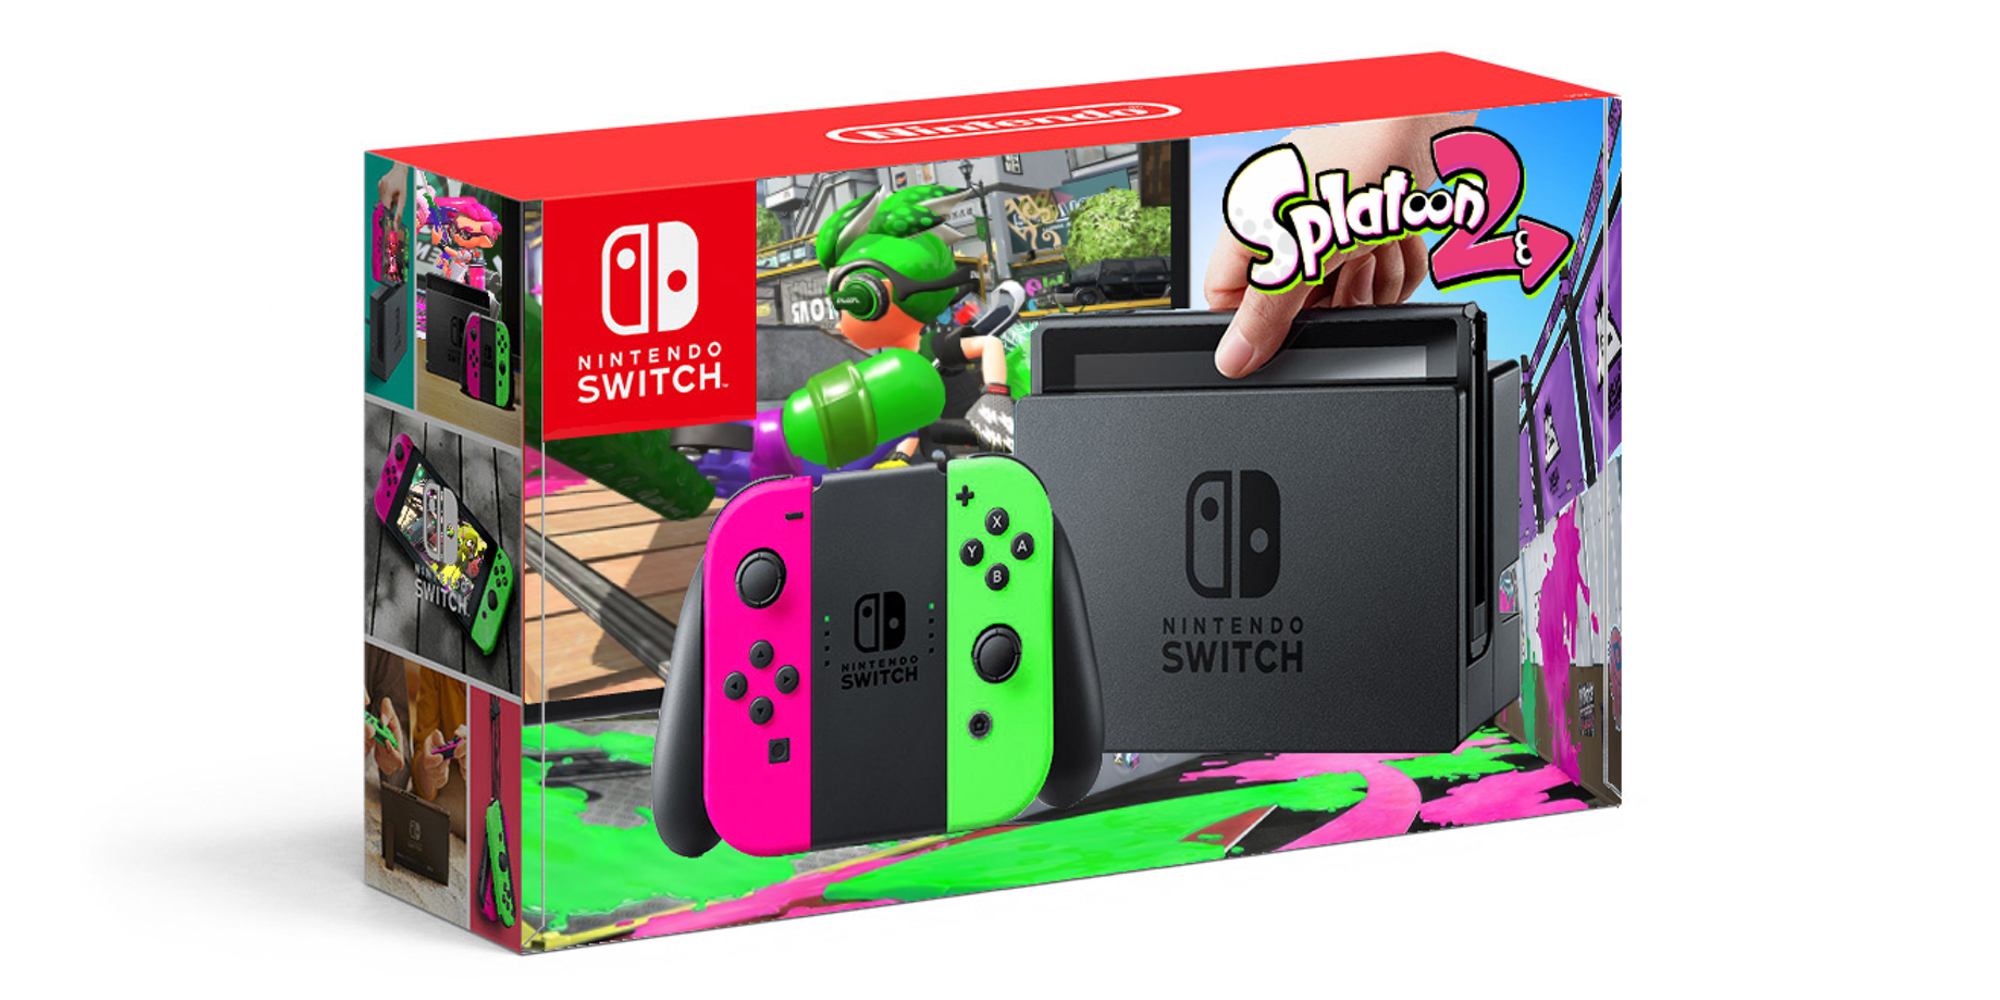 Nintendo's Splatoon 2 bundle makes a comeback with 90-day Switch